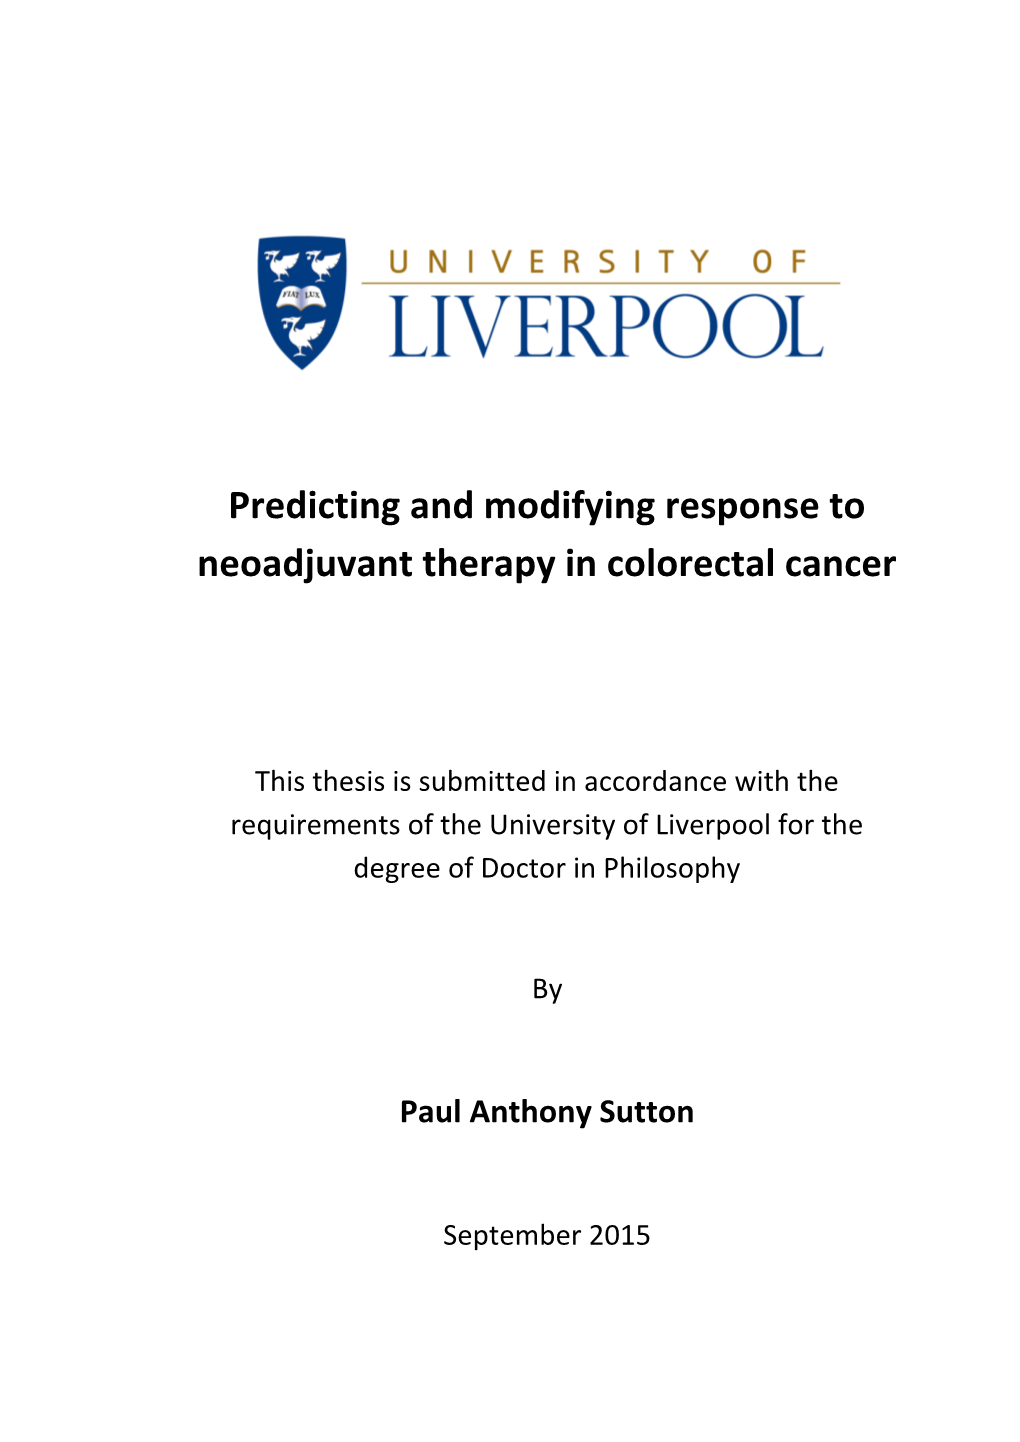 Predicting and Modifying Response to Neoadjuvant Therapy in Colorectal Cancer